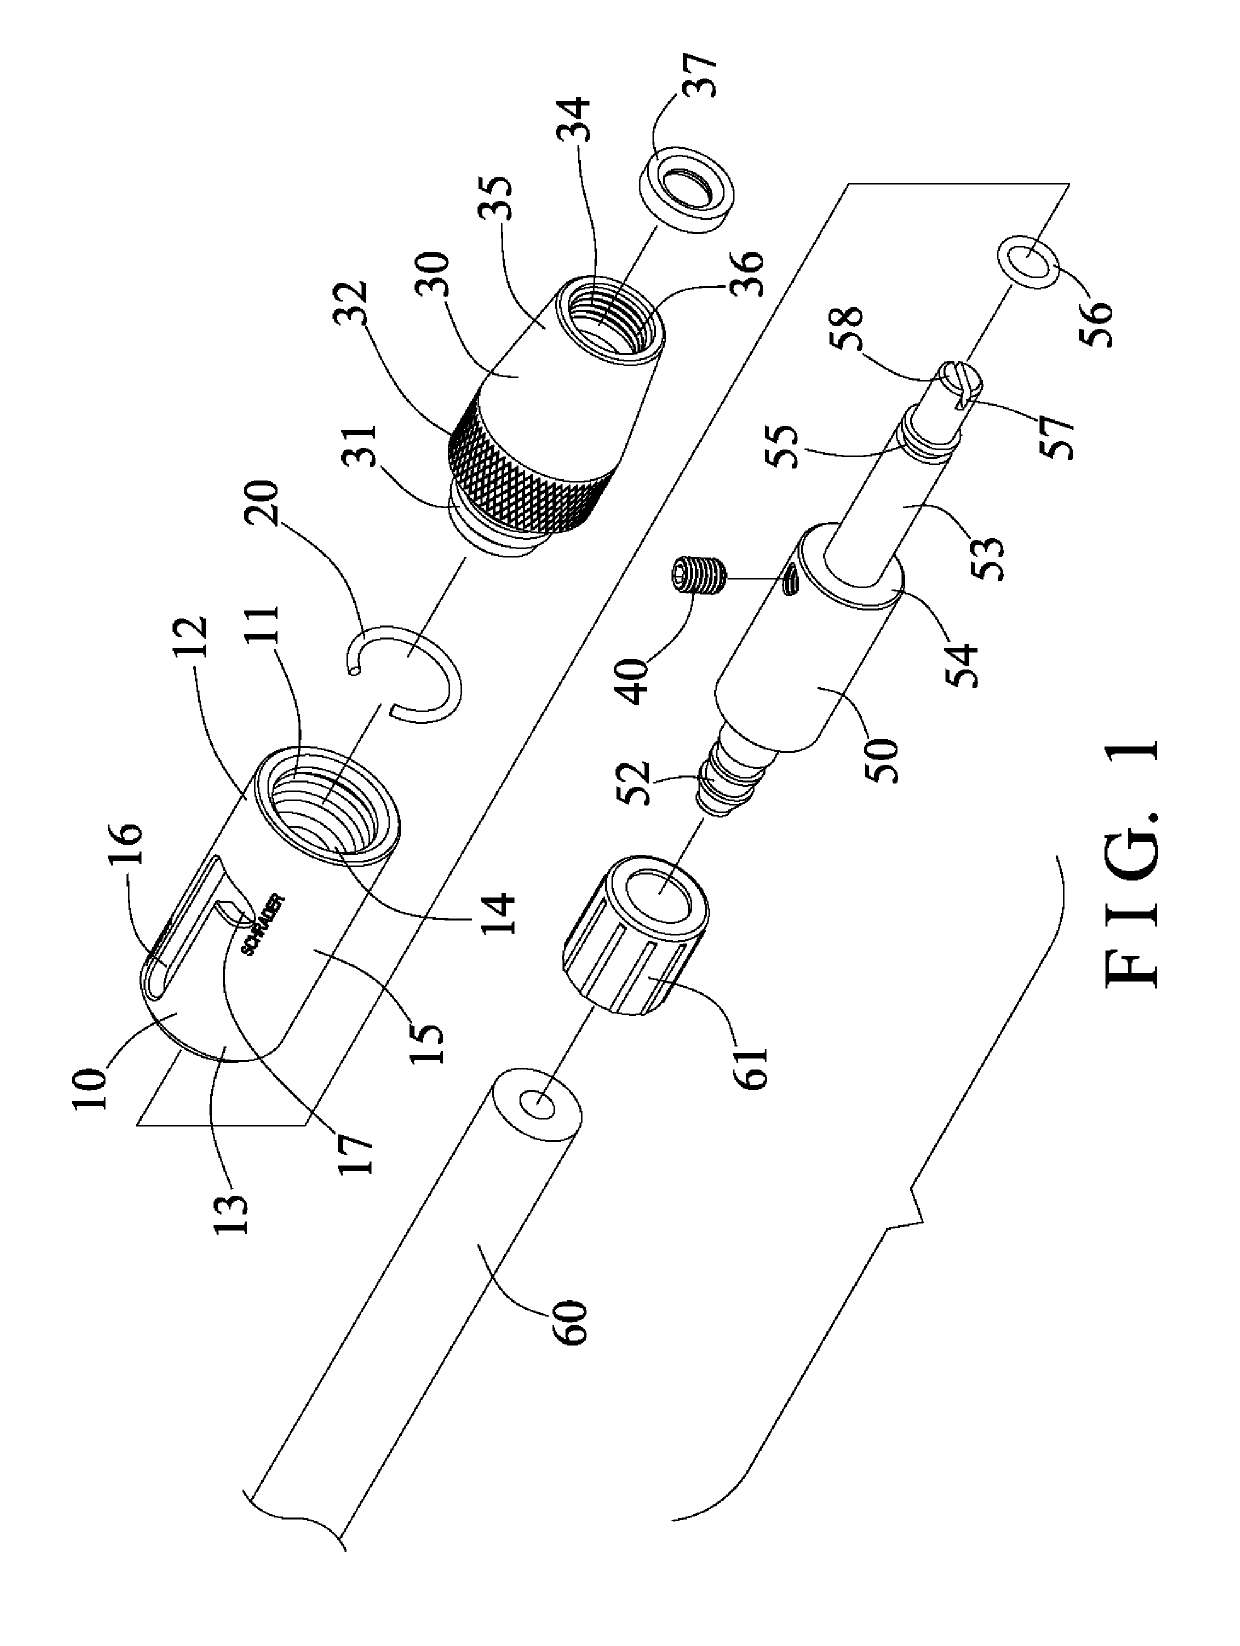 Air valve connecting device for different inflation valves